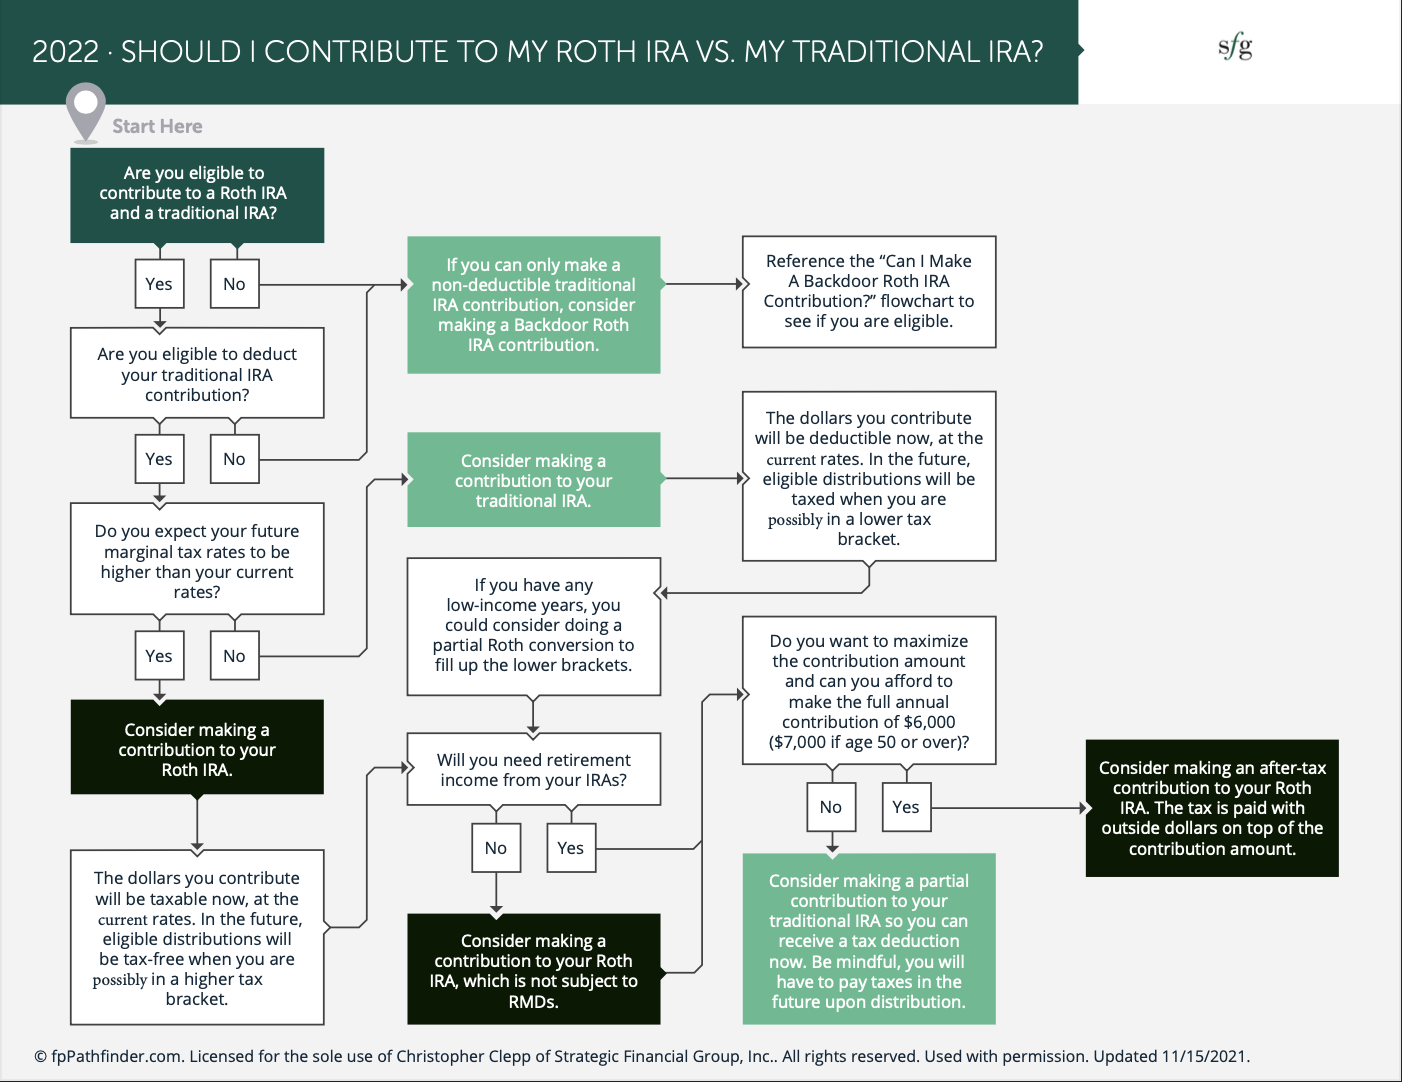 Should I Contribute To My Roth IRA vs. My Traditional IRA? Building